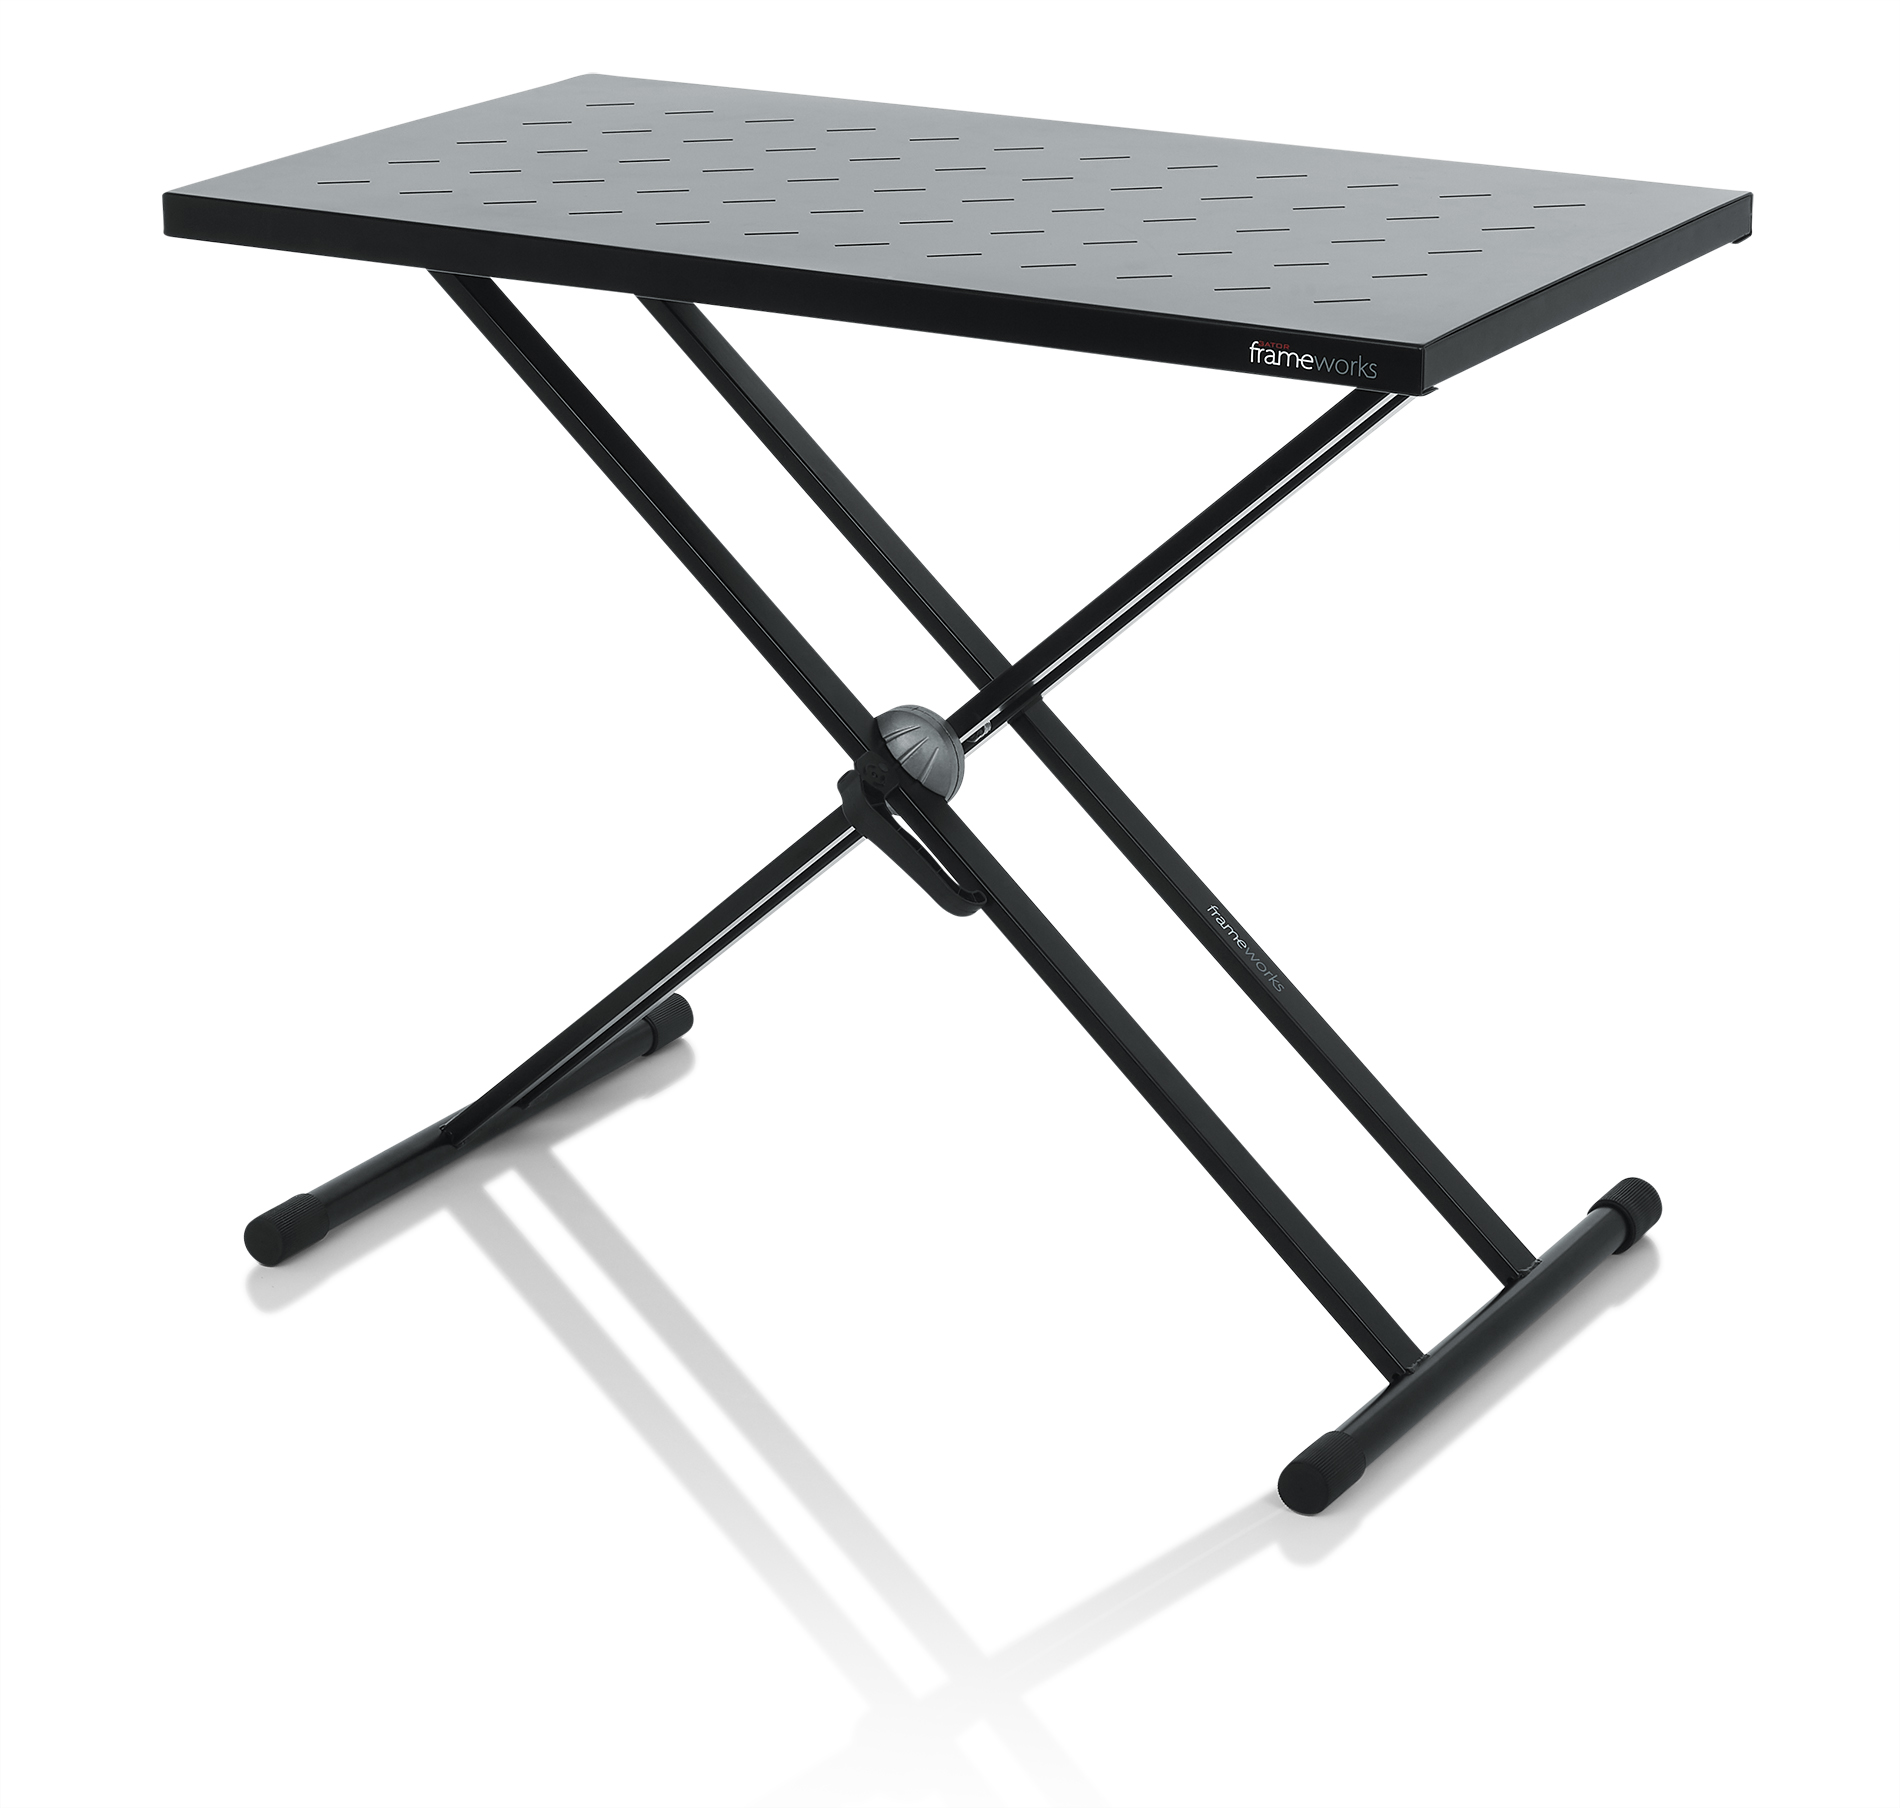 Utility table top with double-X stand-GFW-UTL-XSTDTBLTOPSET - Gator Cases